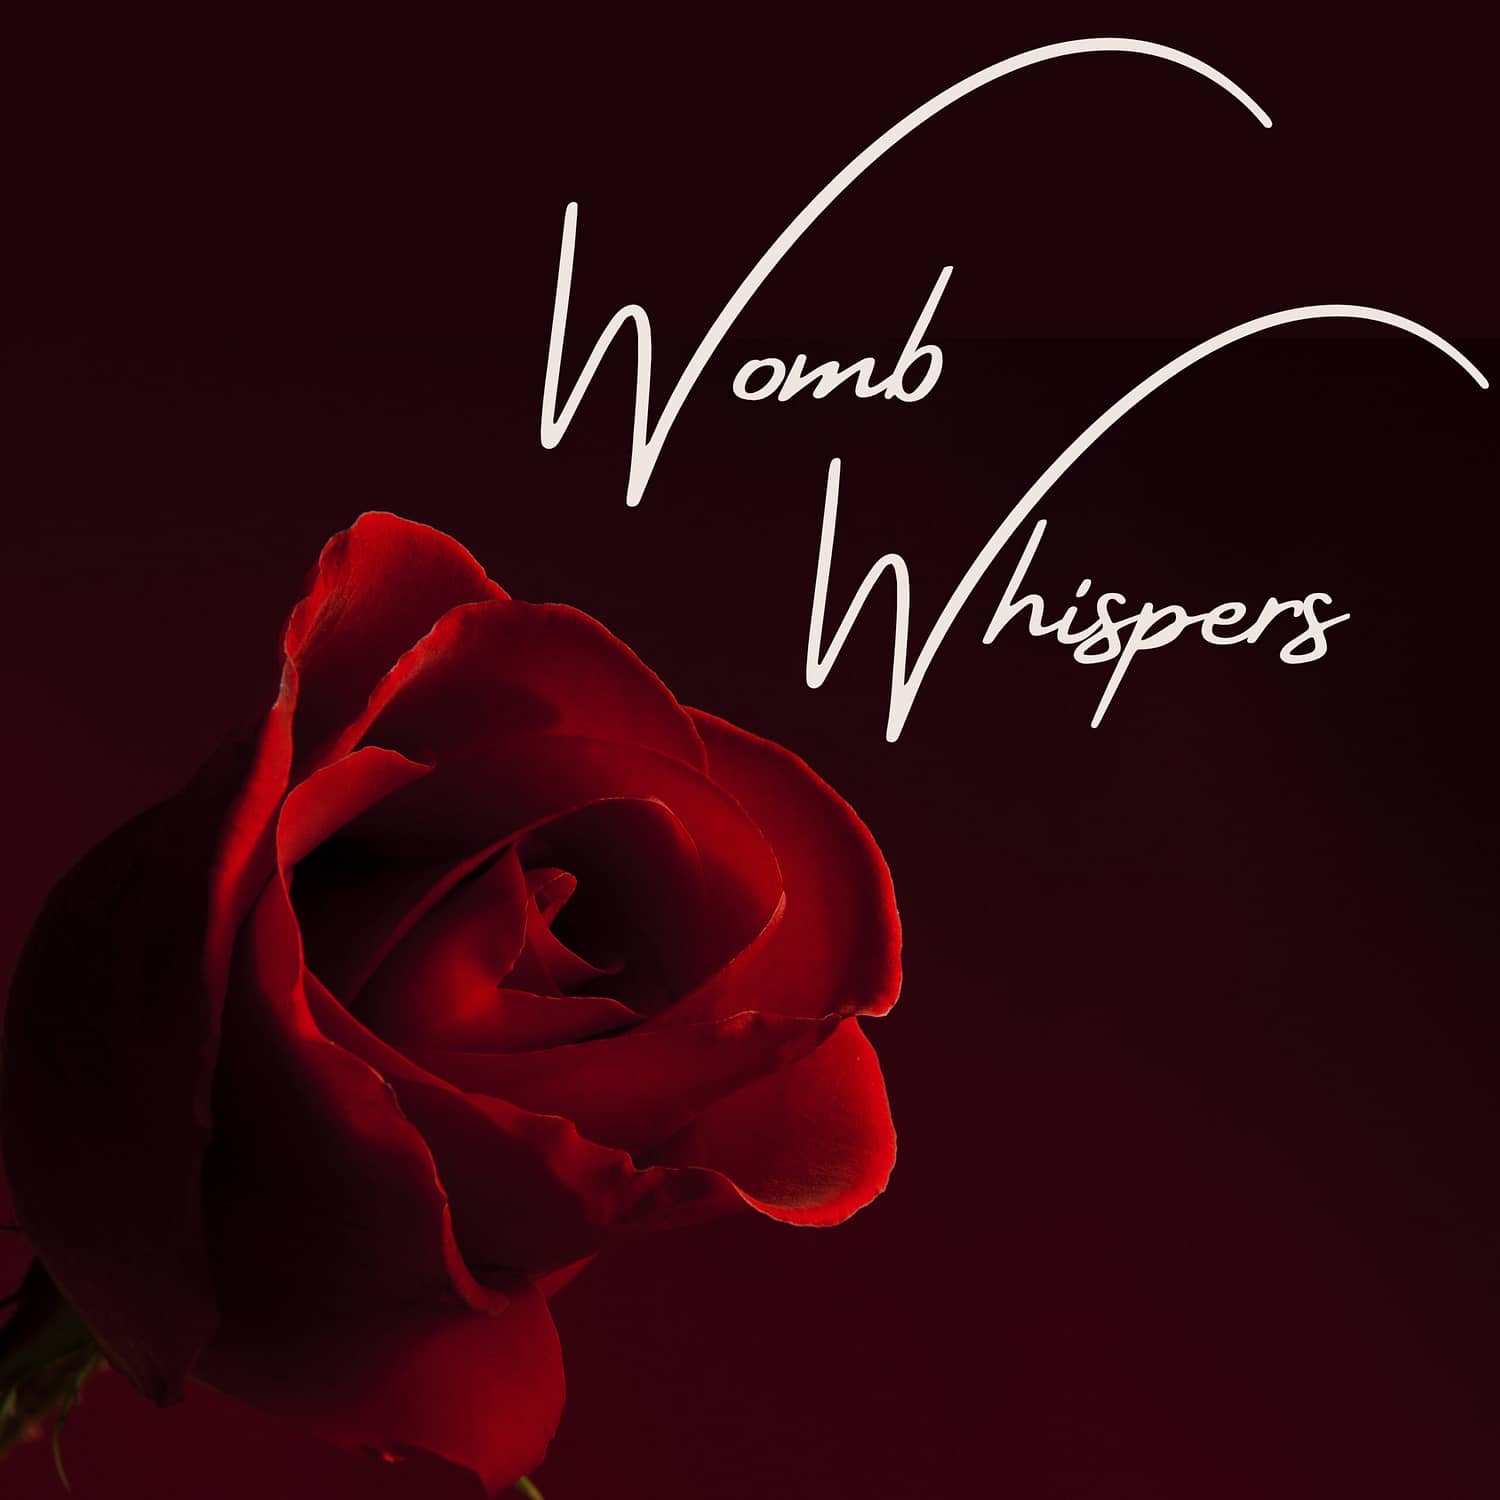 Big dark red rose on dark red background, text: Womb Whispers